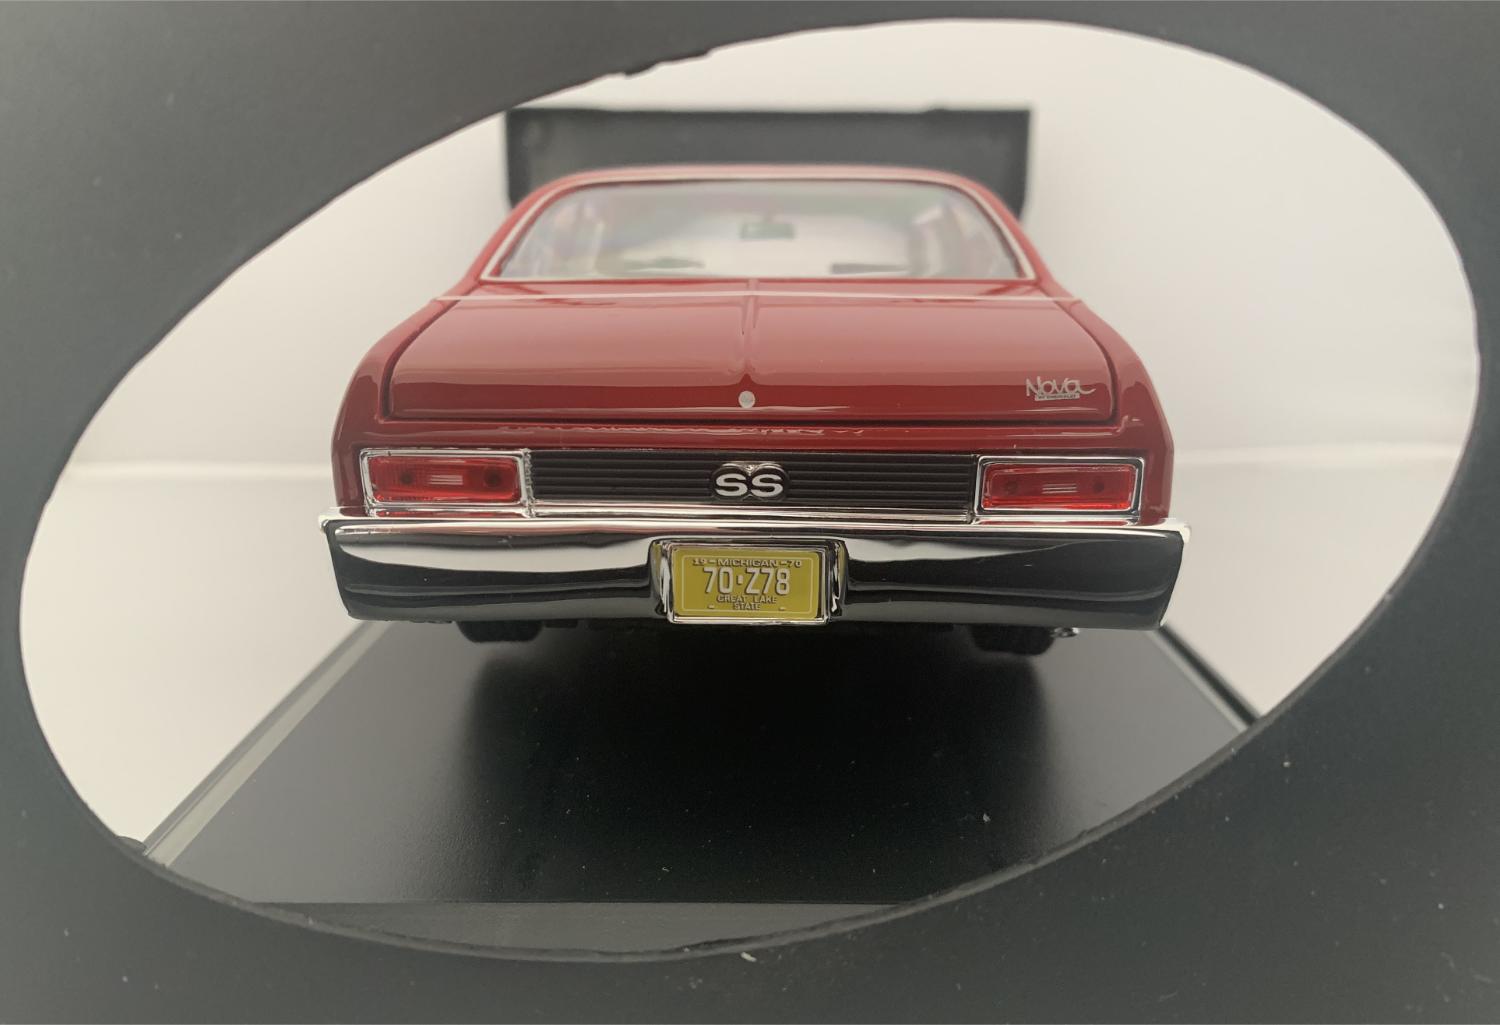 Chevrolet Nova SS 1970 in red 1:18 scale diecast model car from Maisto, 31132